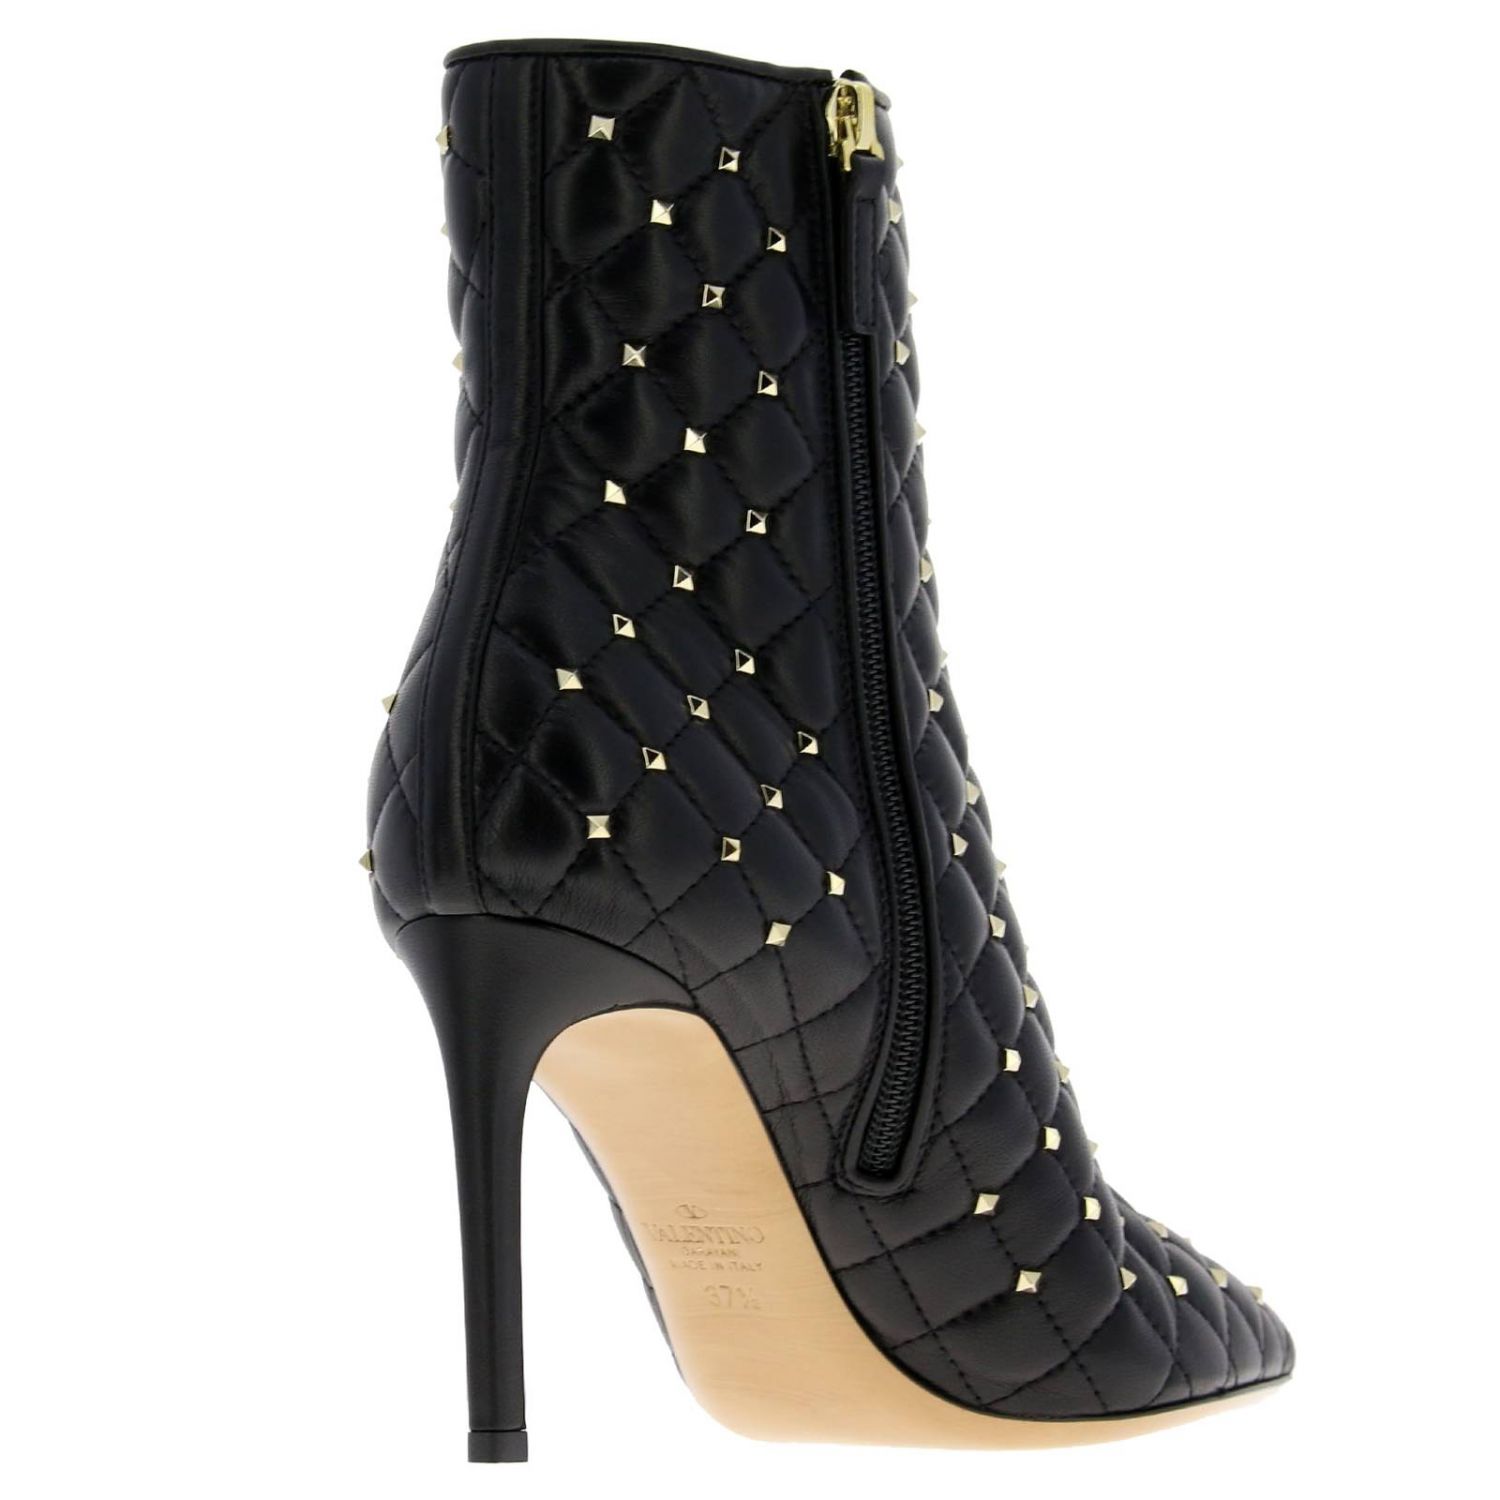 Skat økologisk Problemer VALENTINO GARAVANI: Valentino Rockstud Spike ankle boot in quilted leather  with mini metal studs | Heeled Booties Valentino Garavani Women Black |  Heeled Booties Valentino Garavani QW2S0I06 NSN GIGLIO.COM